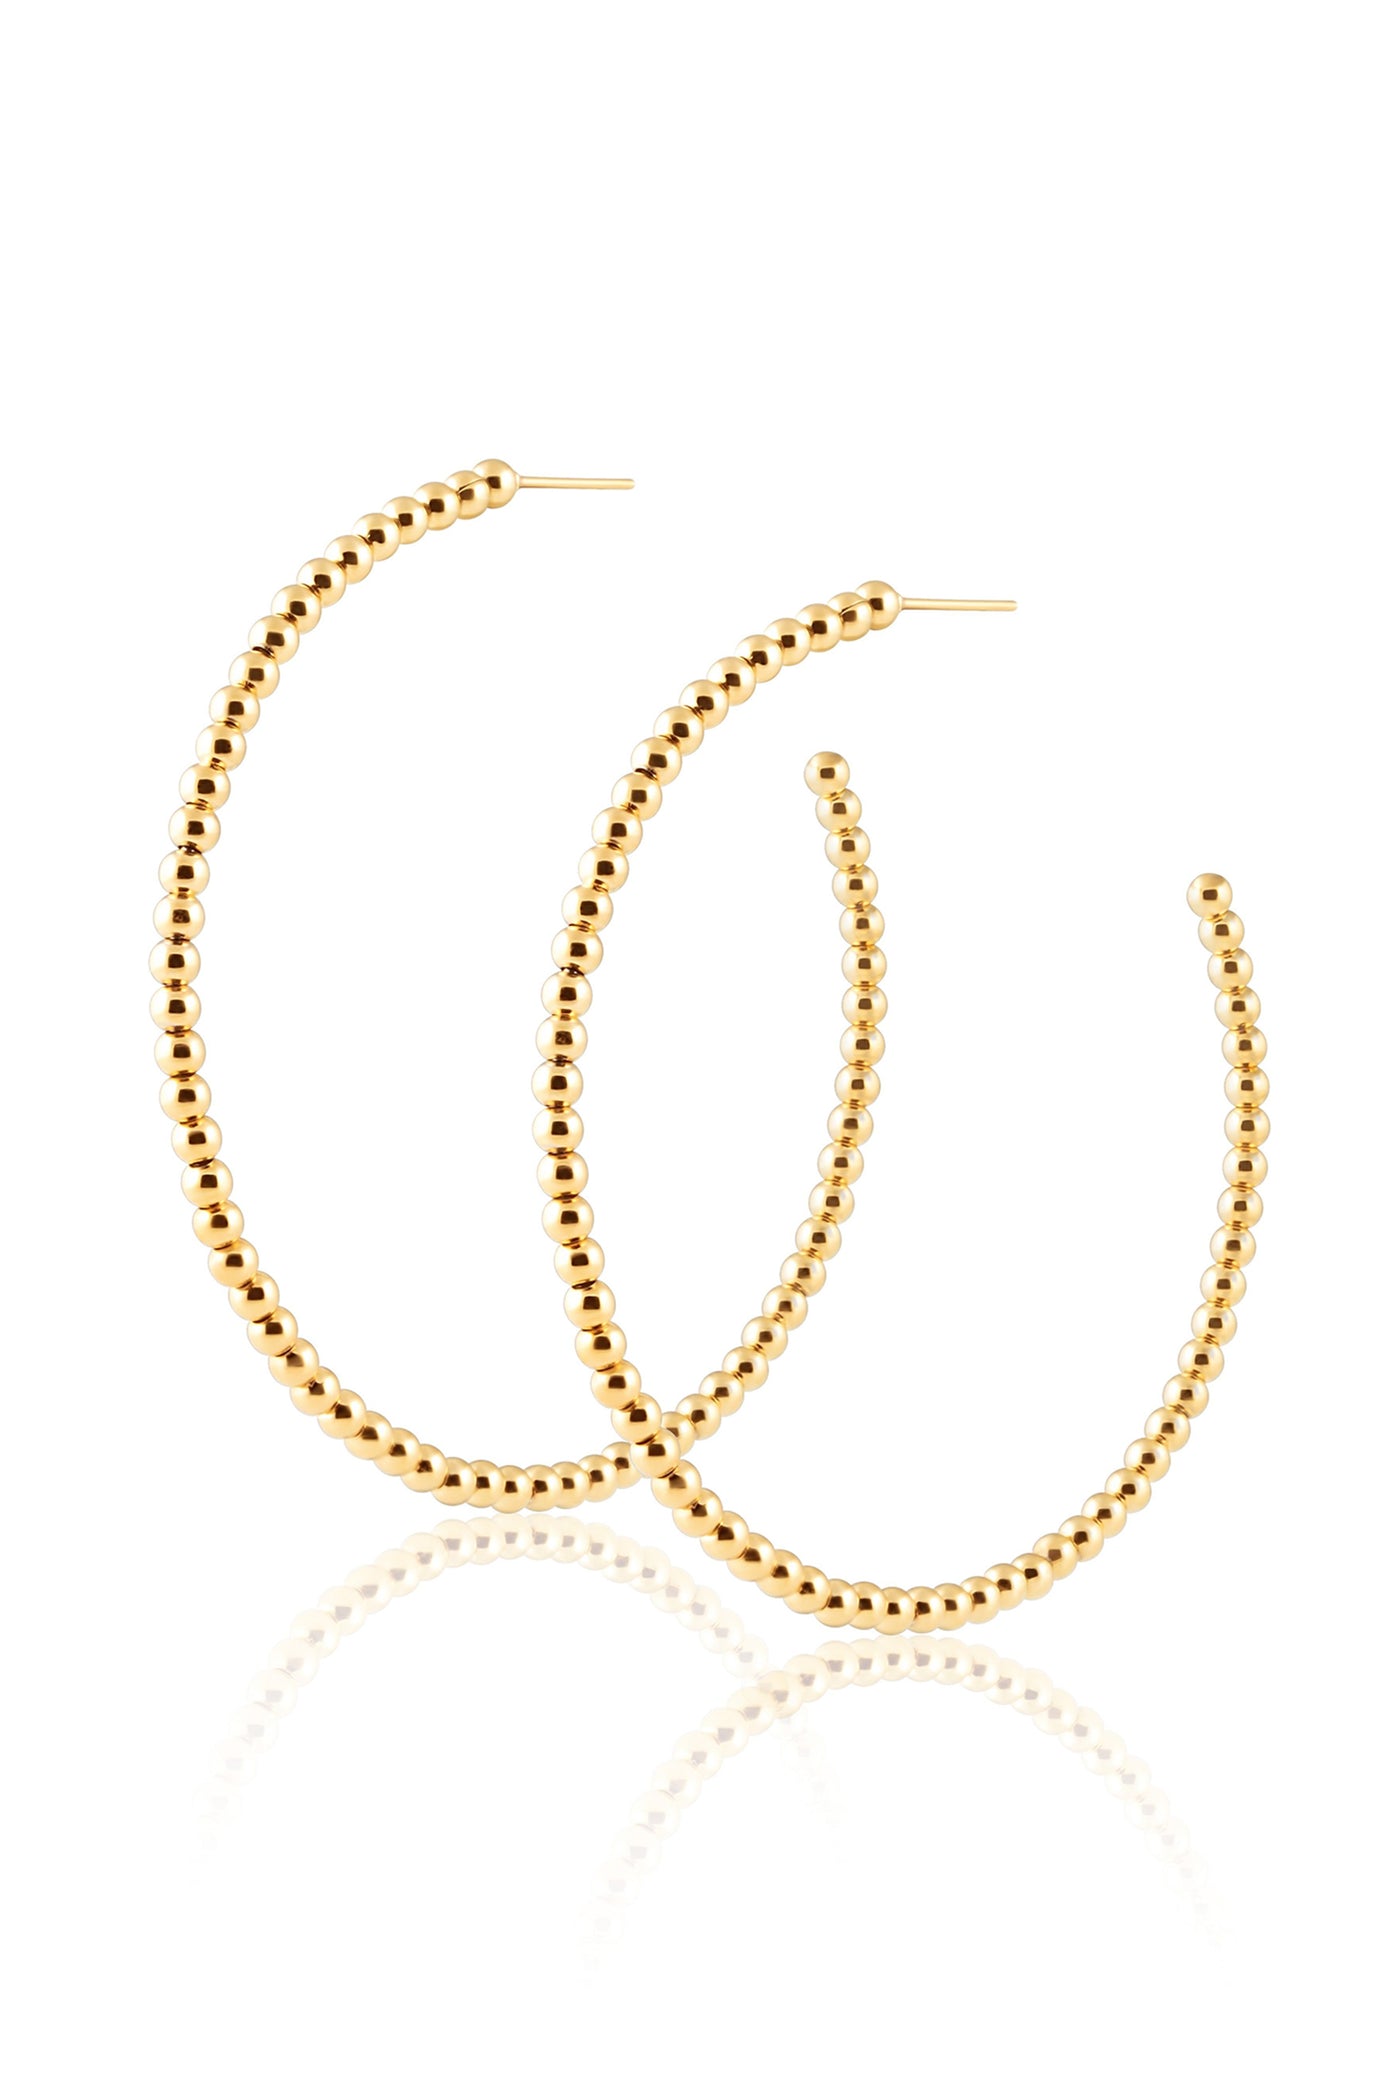 These gold metal beaded oversized hoops are the perfect accessory for everyday modest dresses. 